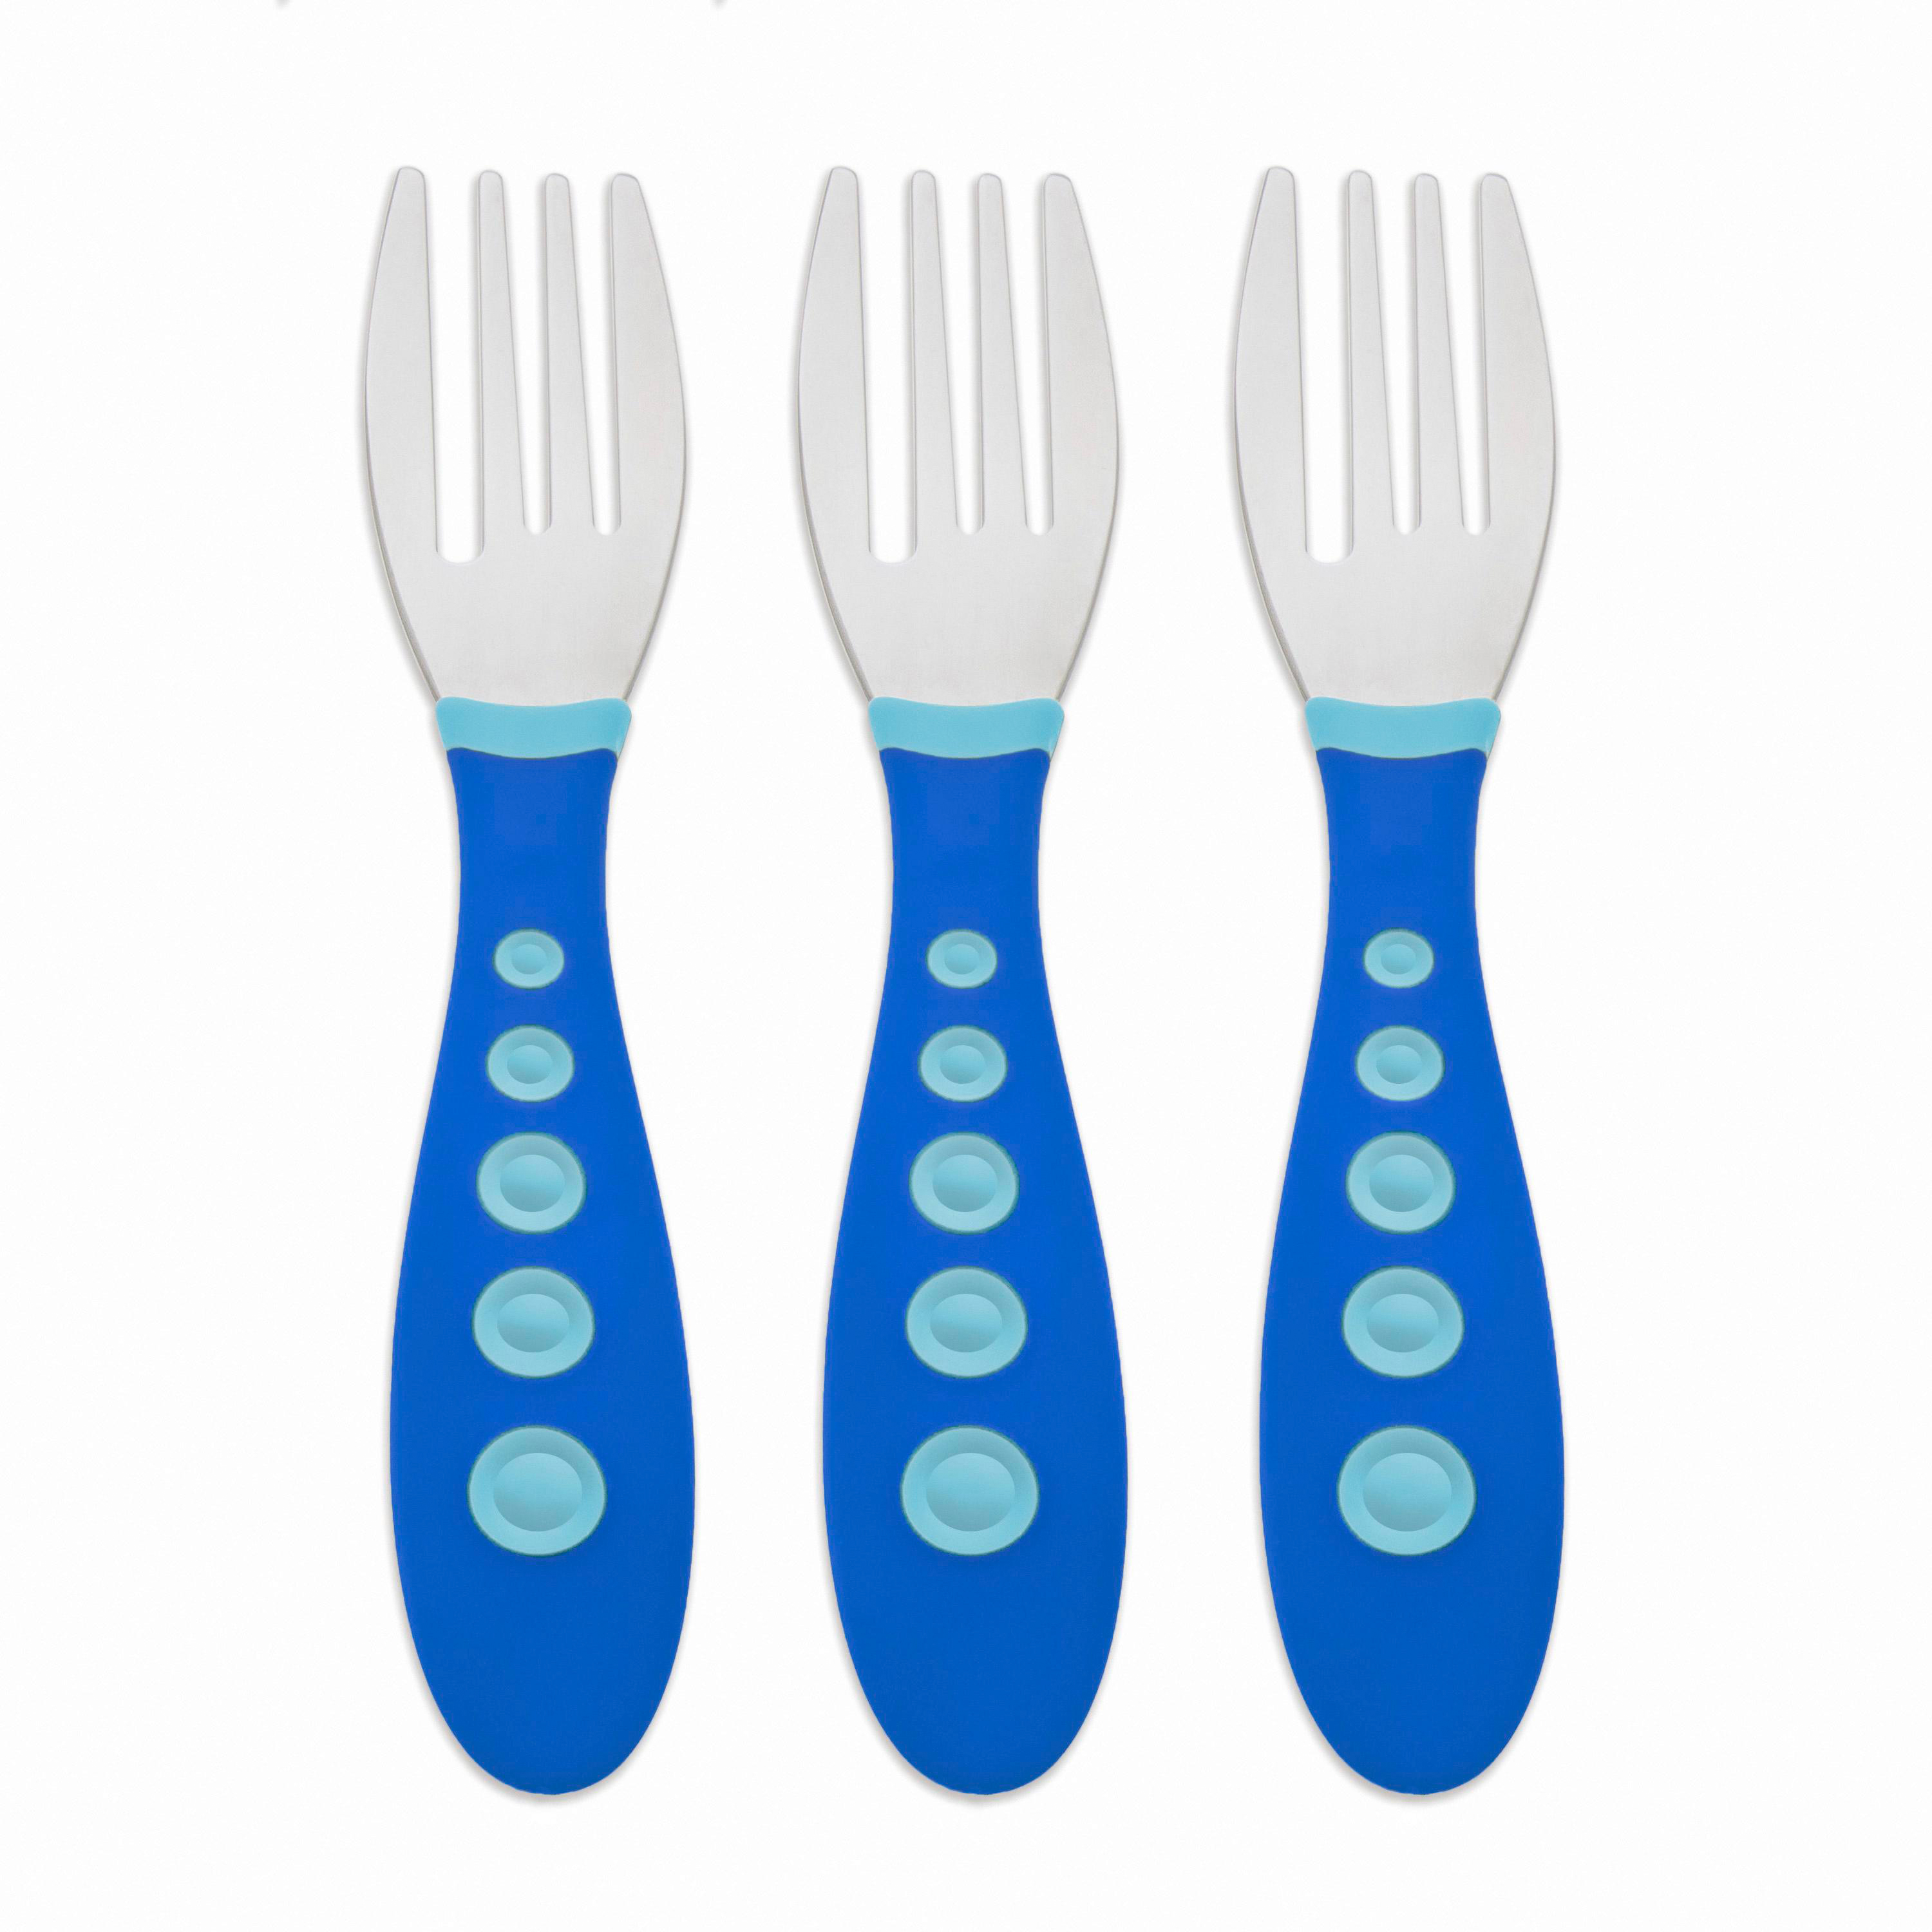 First Essentials by NUK Kiddy Cutlery Forks, 3-Pack, Green, Blue - image 3 of 6